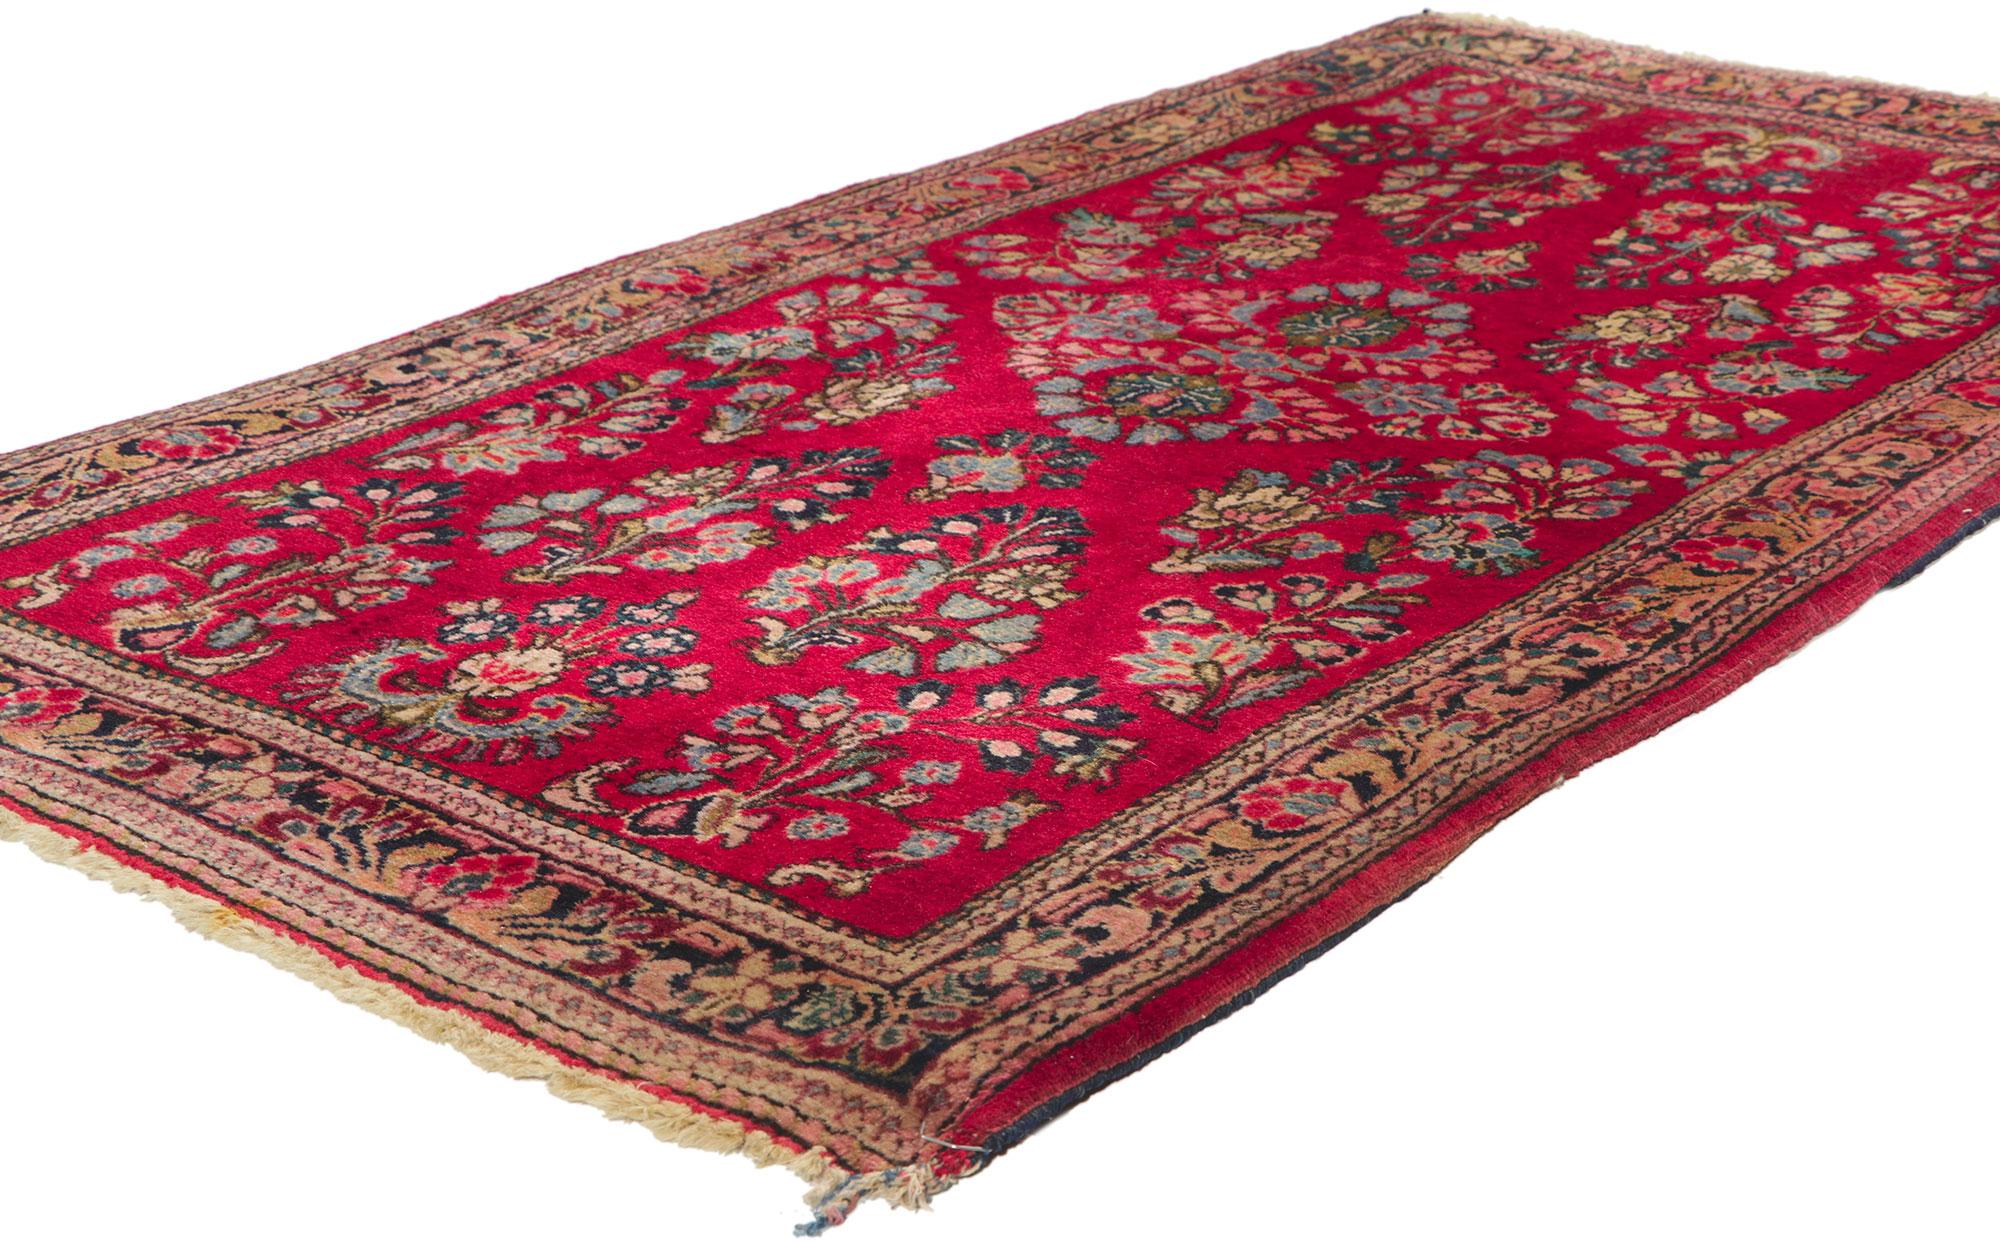 78315 Vintage Persian Sarouk Rug, 02'07 x 04'11.
Exuding a traditional sensibility and regal allure, this exquisite hand-knotted wool vintage Persian Sarouk rug effortlessly captures the essence of timeless elegance. The intricate floral design and